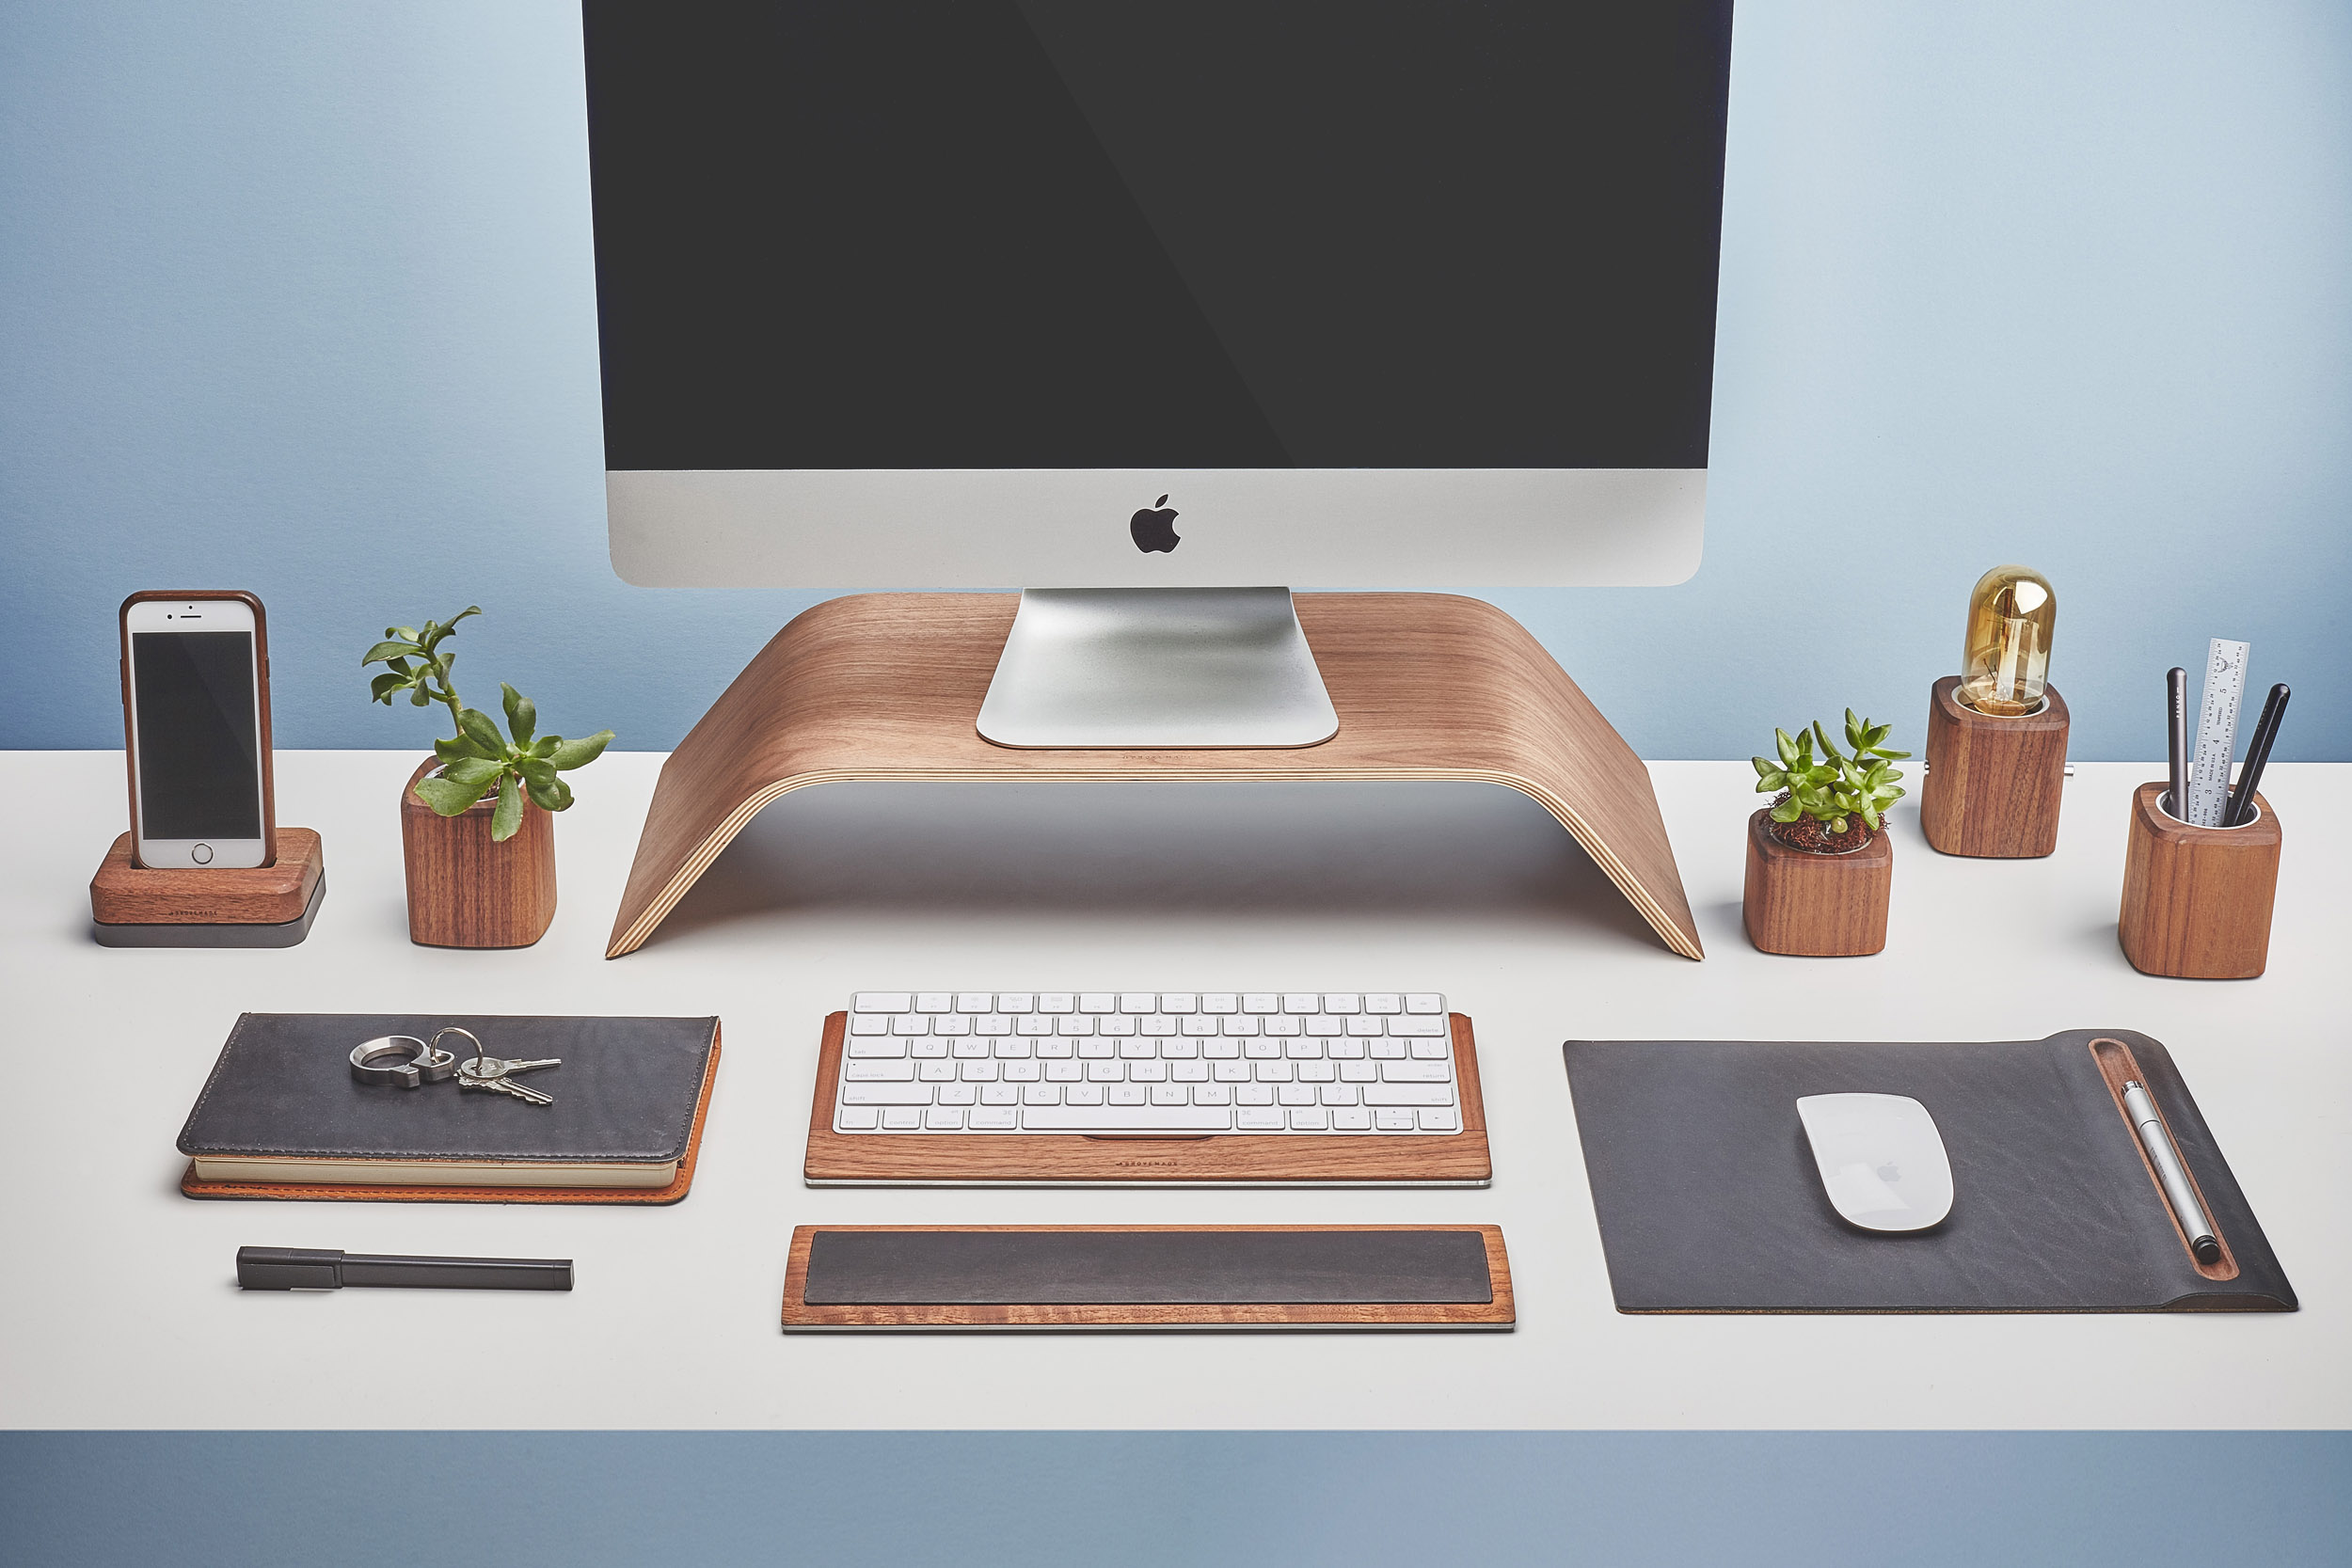 Grovemade: wooden iphone cases desk mac accessories free